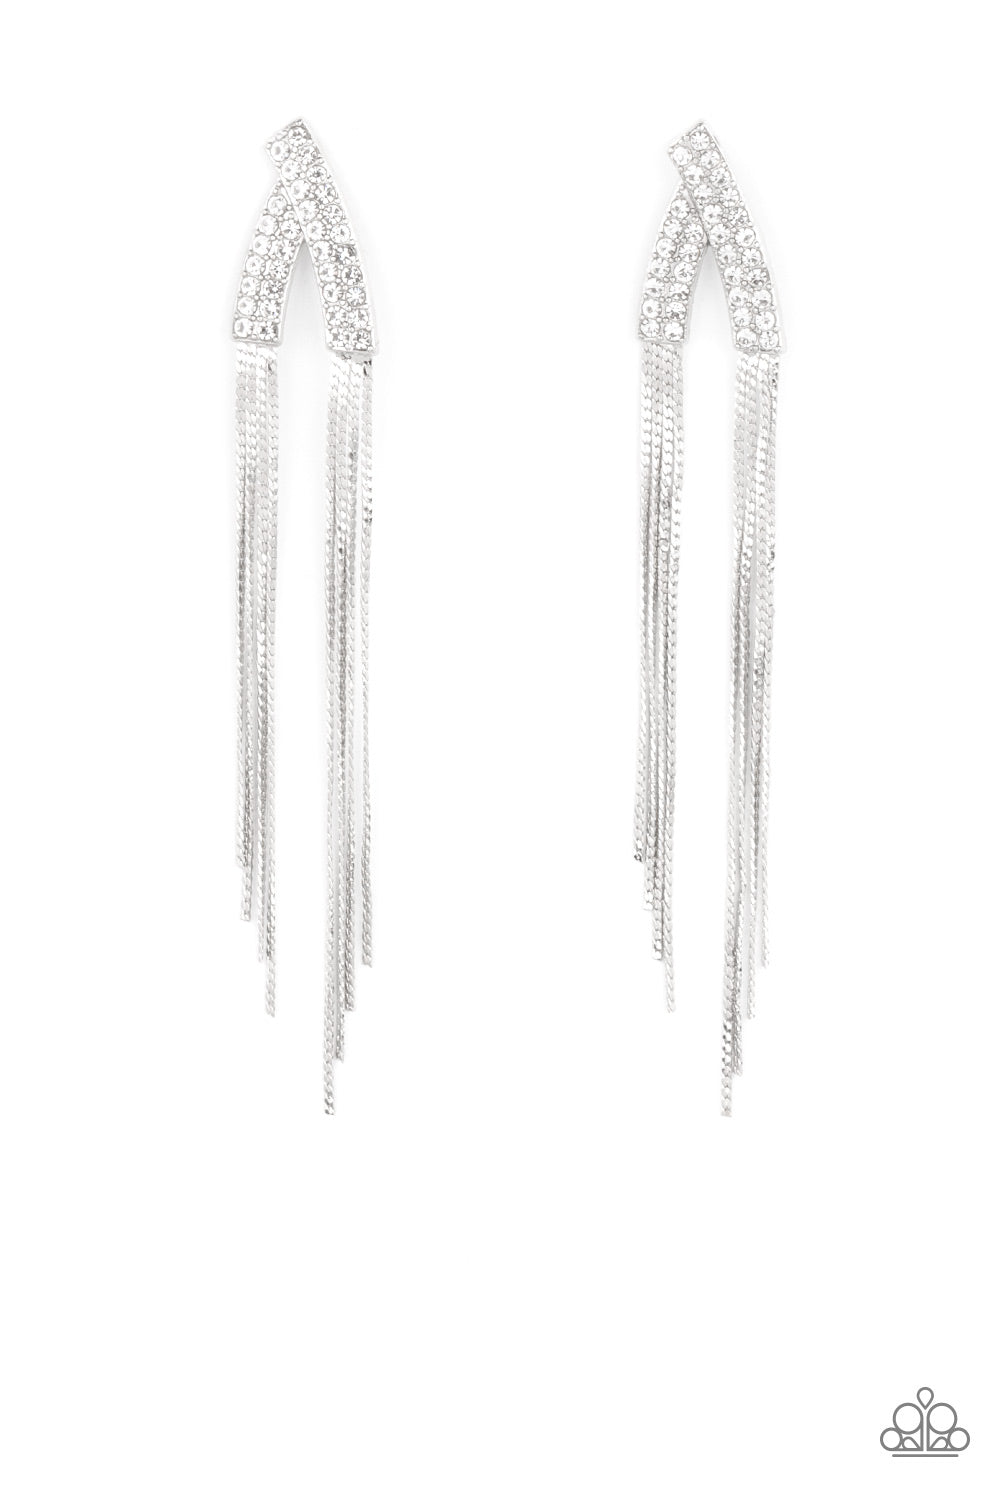 It Takes Two To TASSEL - White ***COMING SOON*** - Bling With Crystal